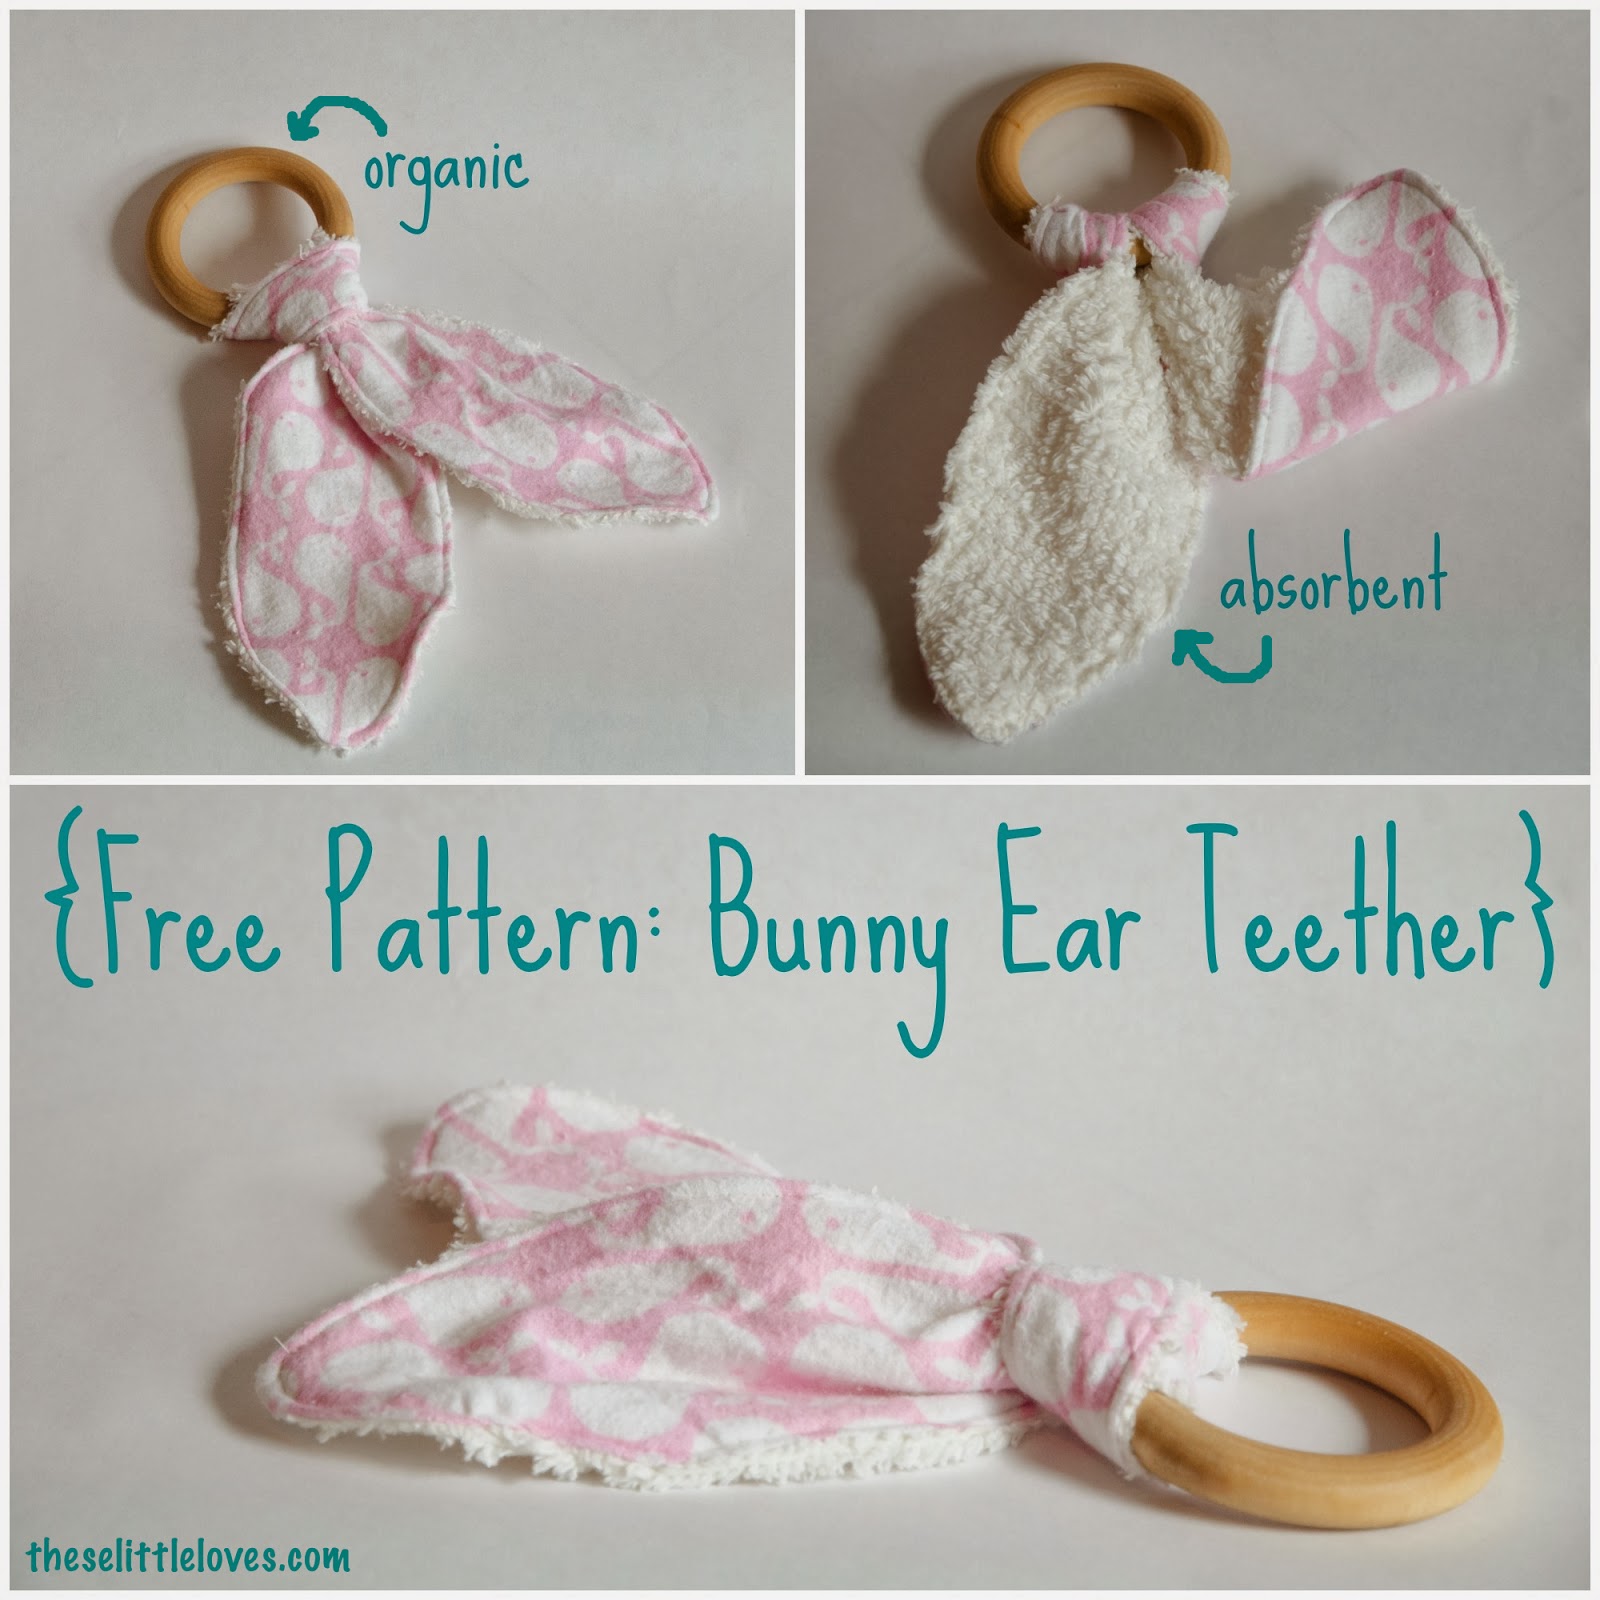 FREE Pattern - Washable! Bunny Ear Teether Toy